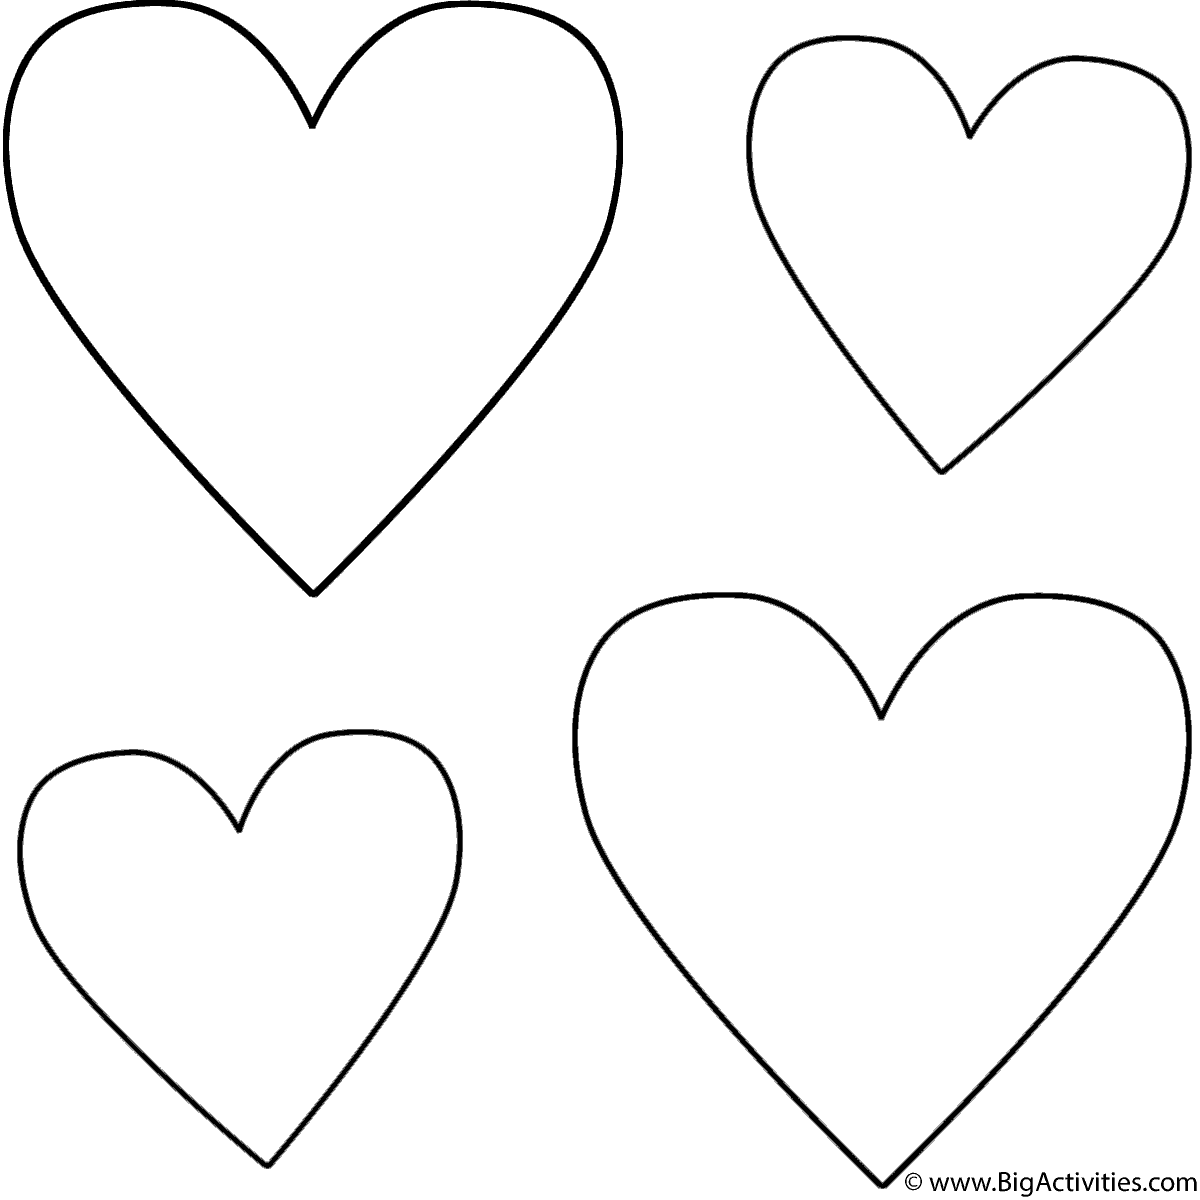 Download Four Hearts - Coloring Page (Mother's Day)